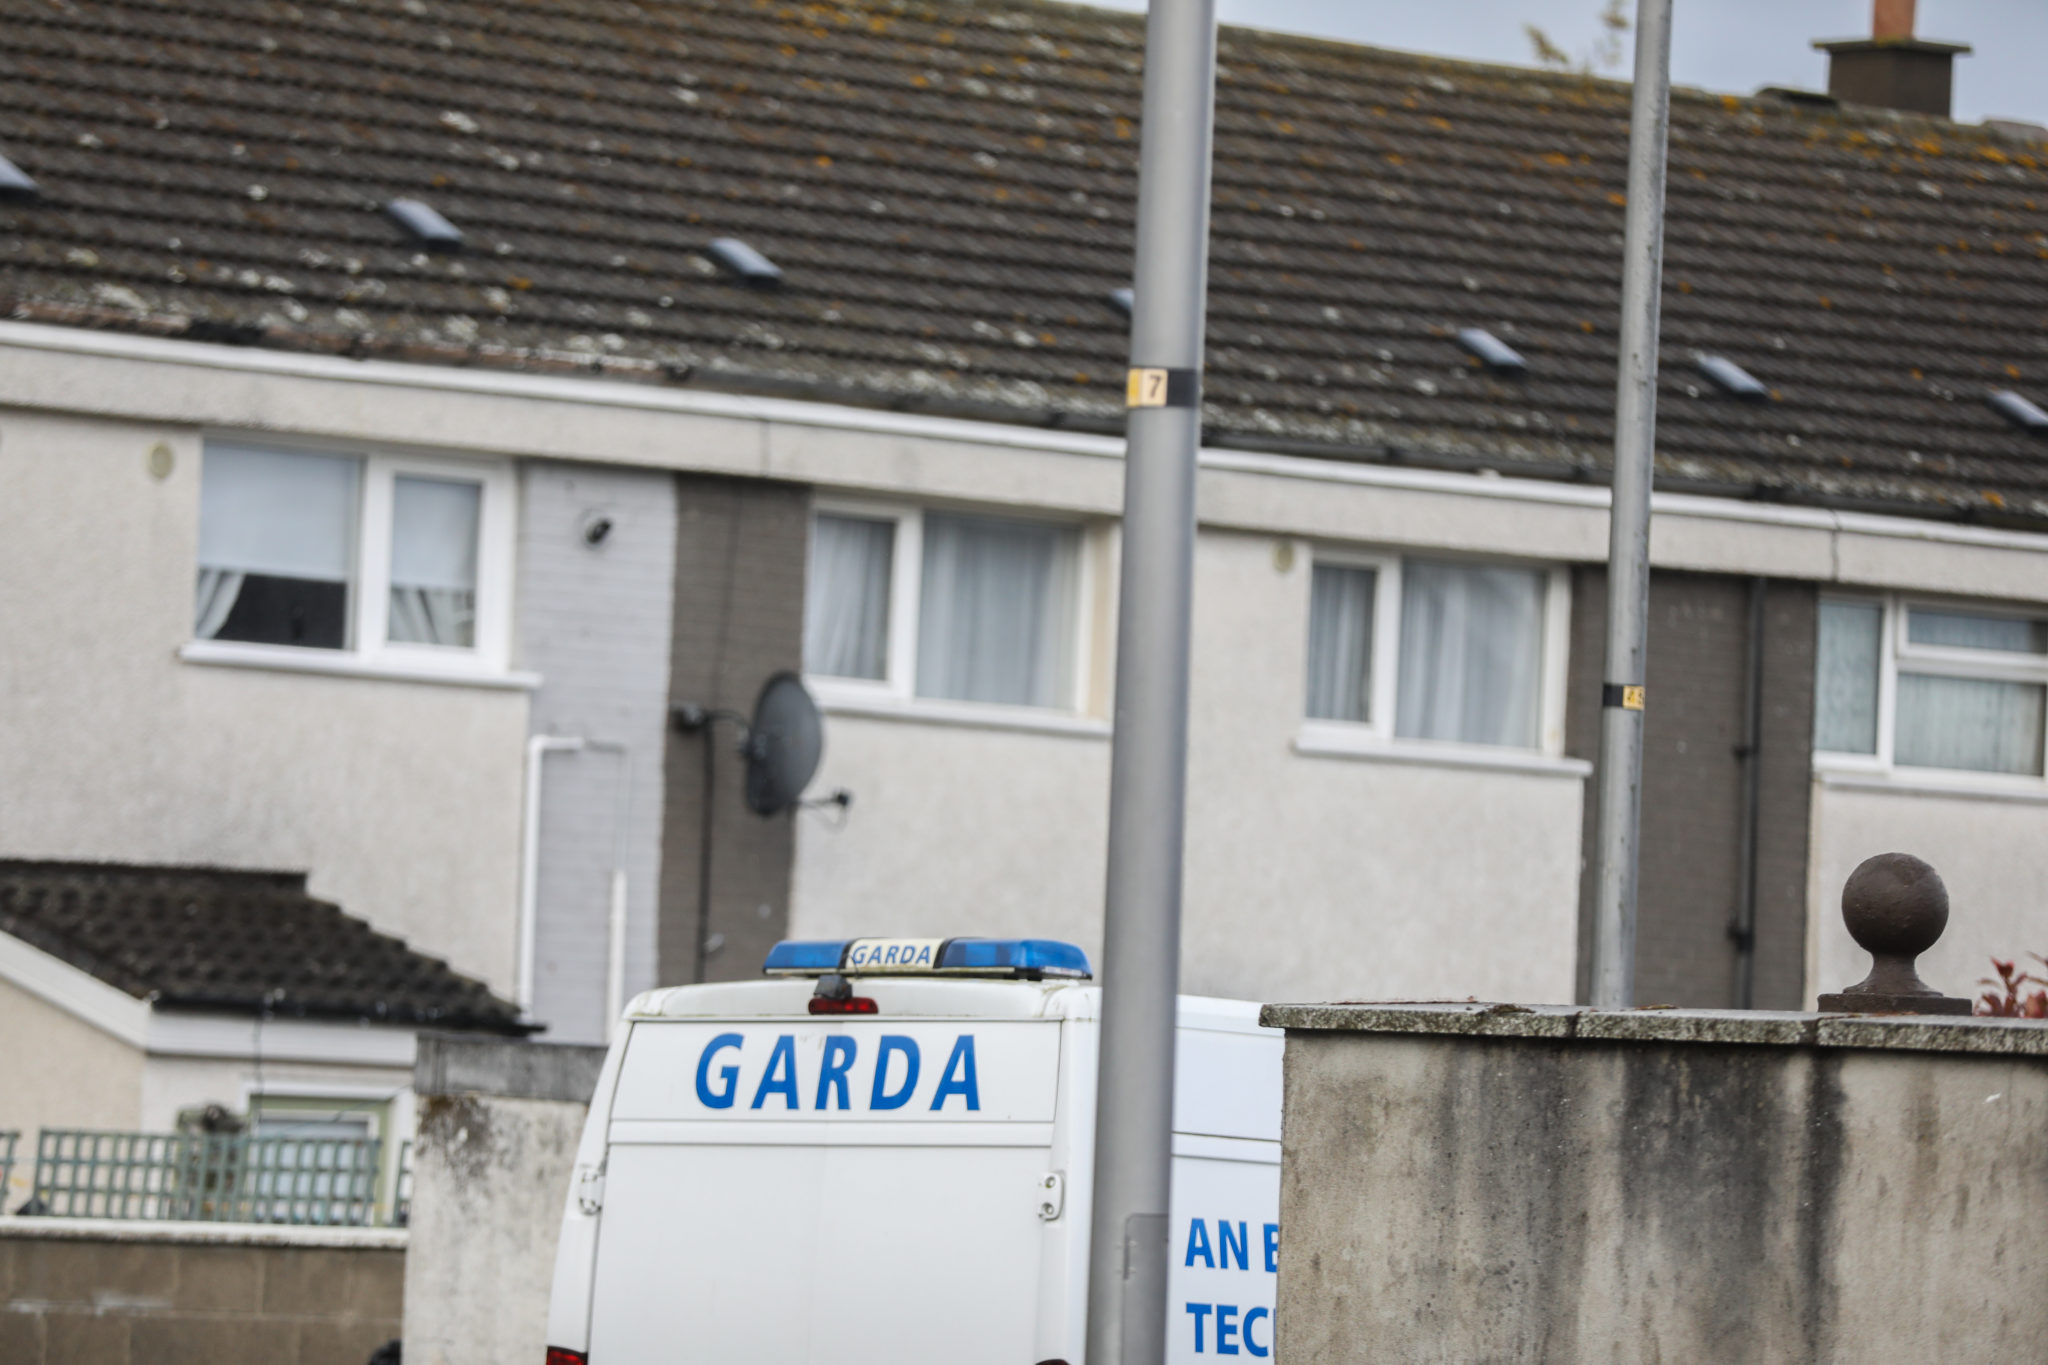 A Garda van on the scene at Sandyhill Gardens in Ballymun, Dublin where the body of a woman was found in her home.